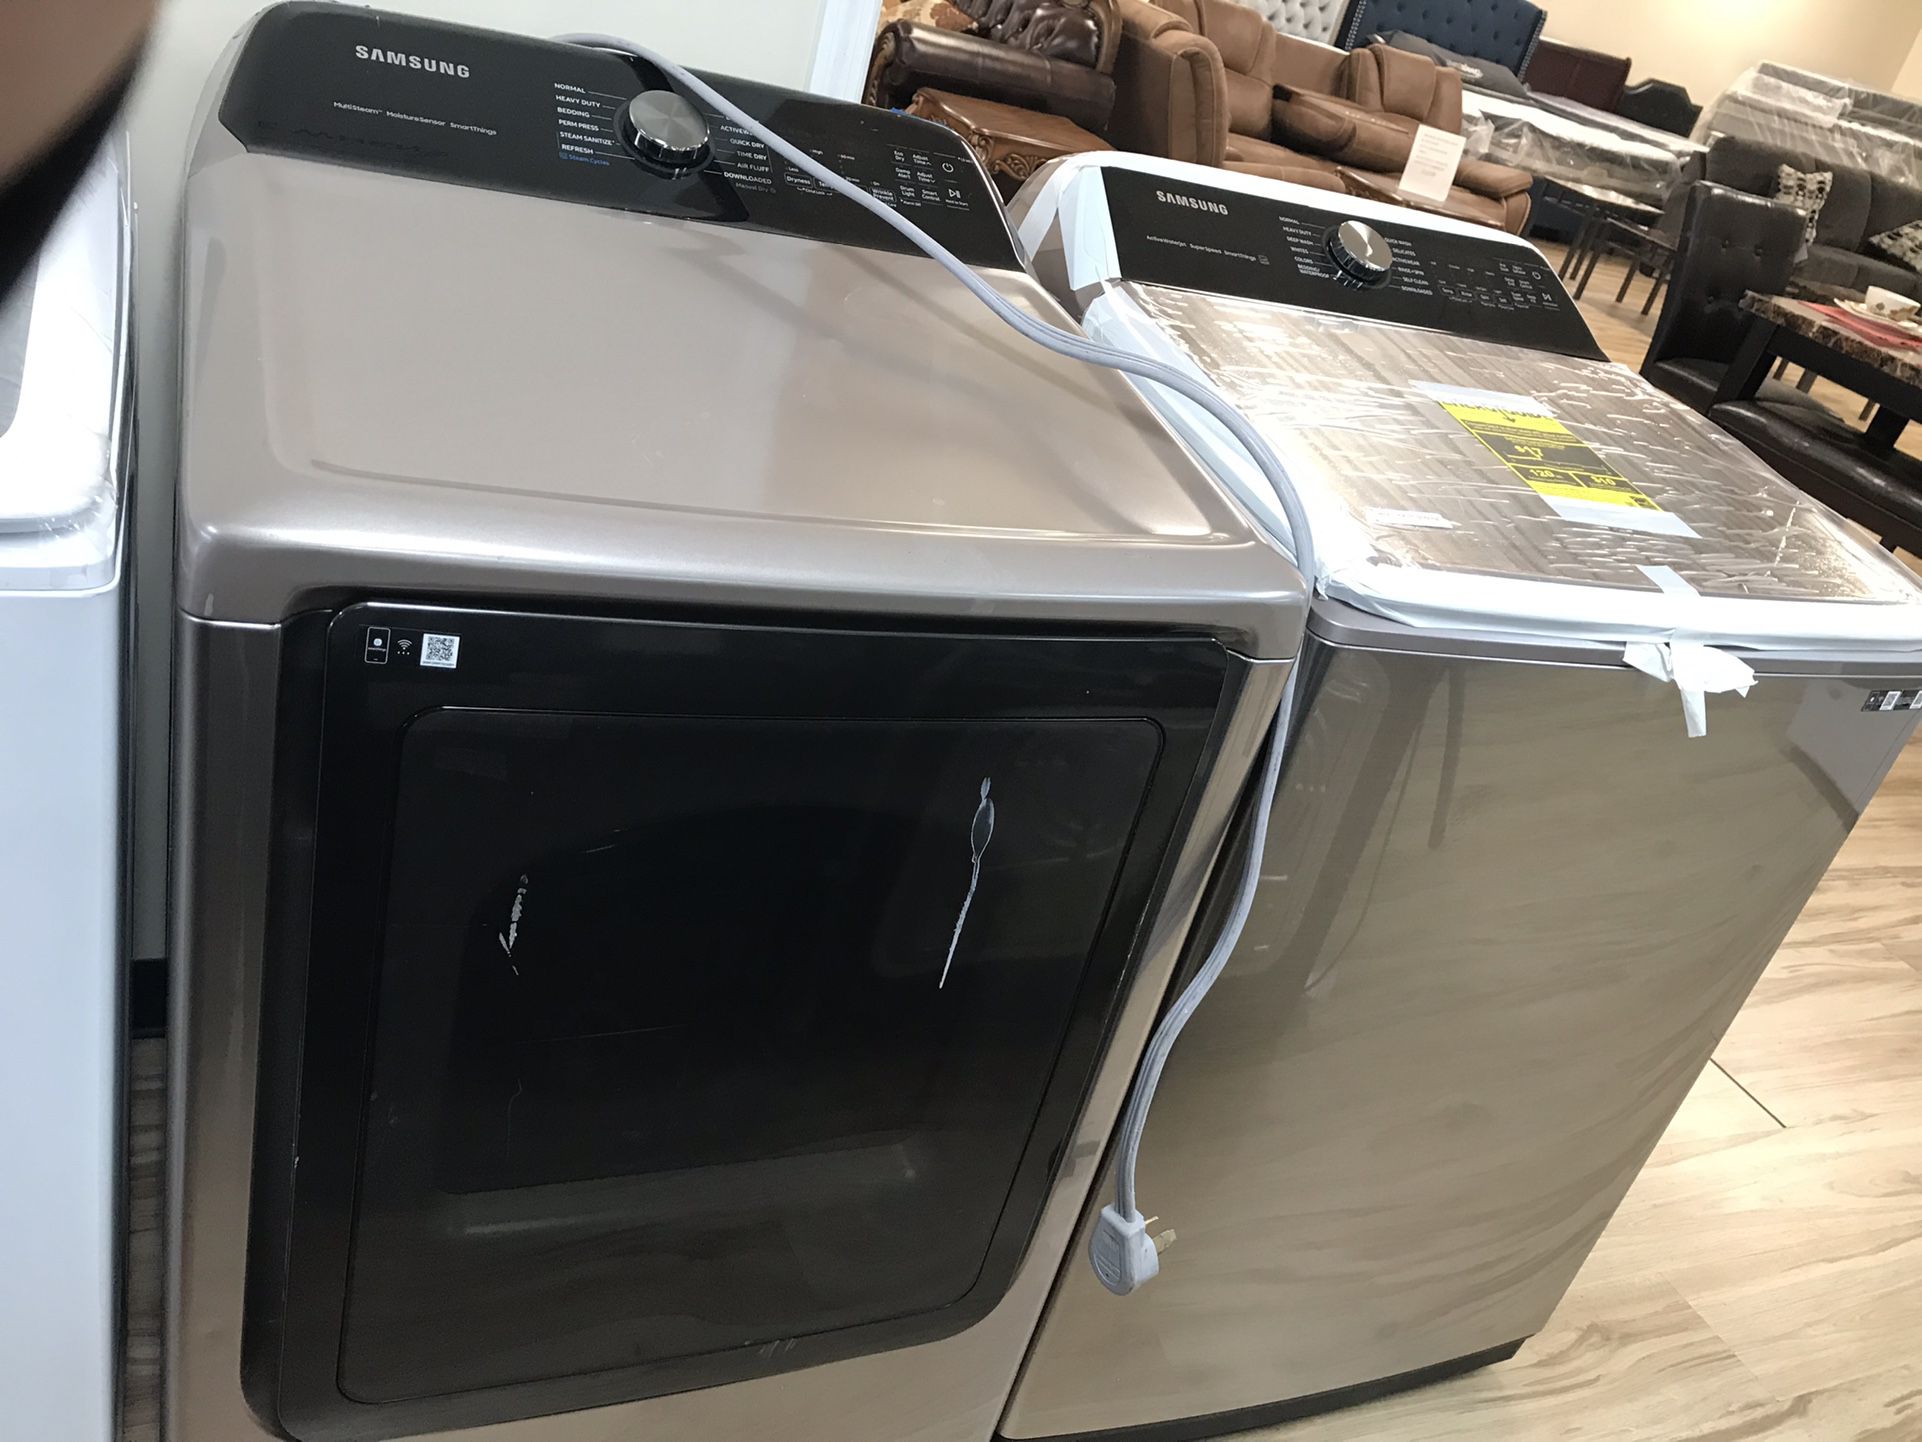 Samsung washer and dryer set in Gold